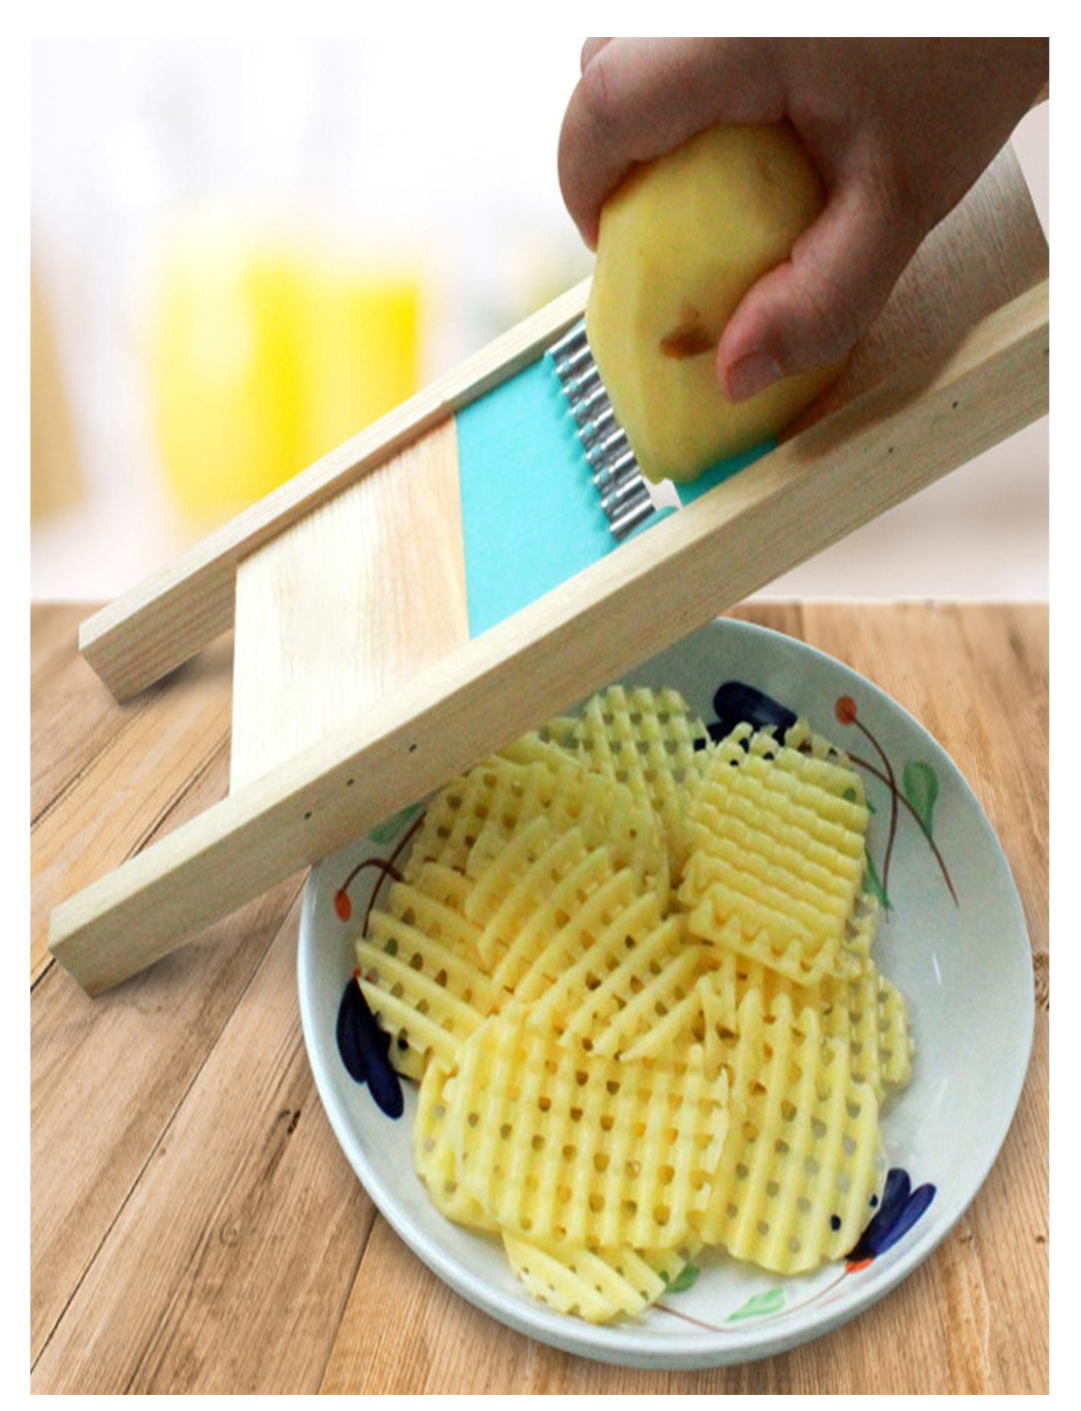 Grate Masterpiece: Elevate Your Kitchen with our Multifunction Stainless Steel Grater!